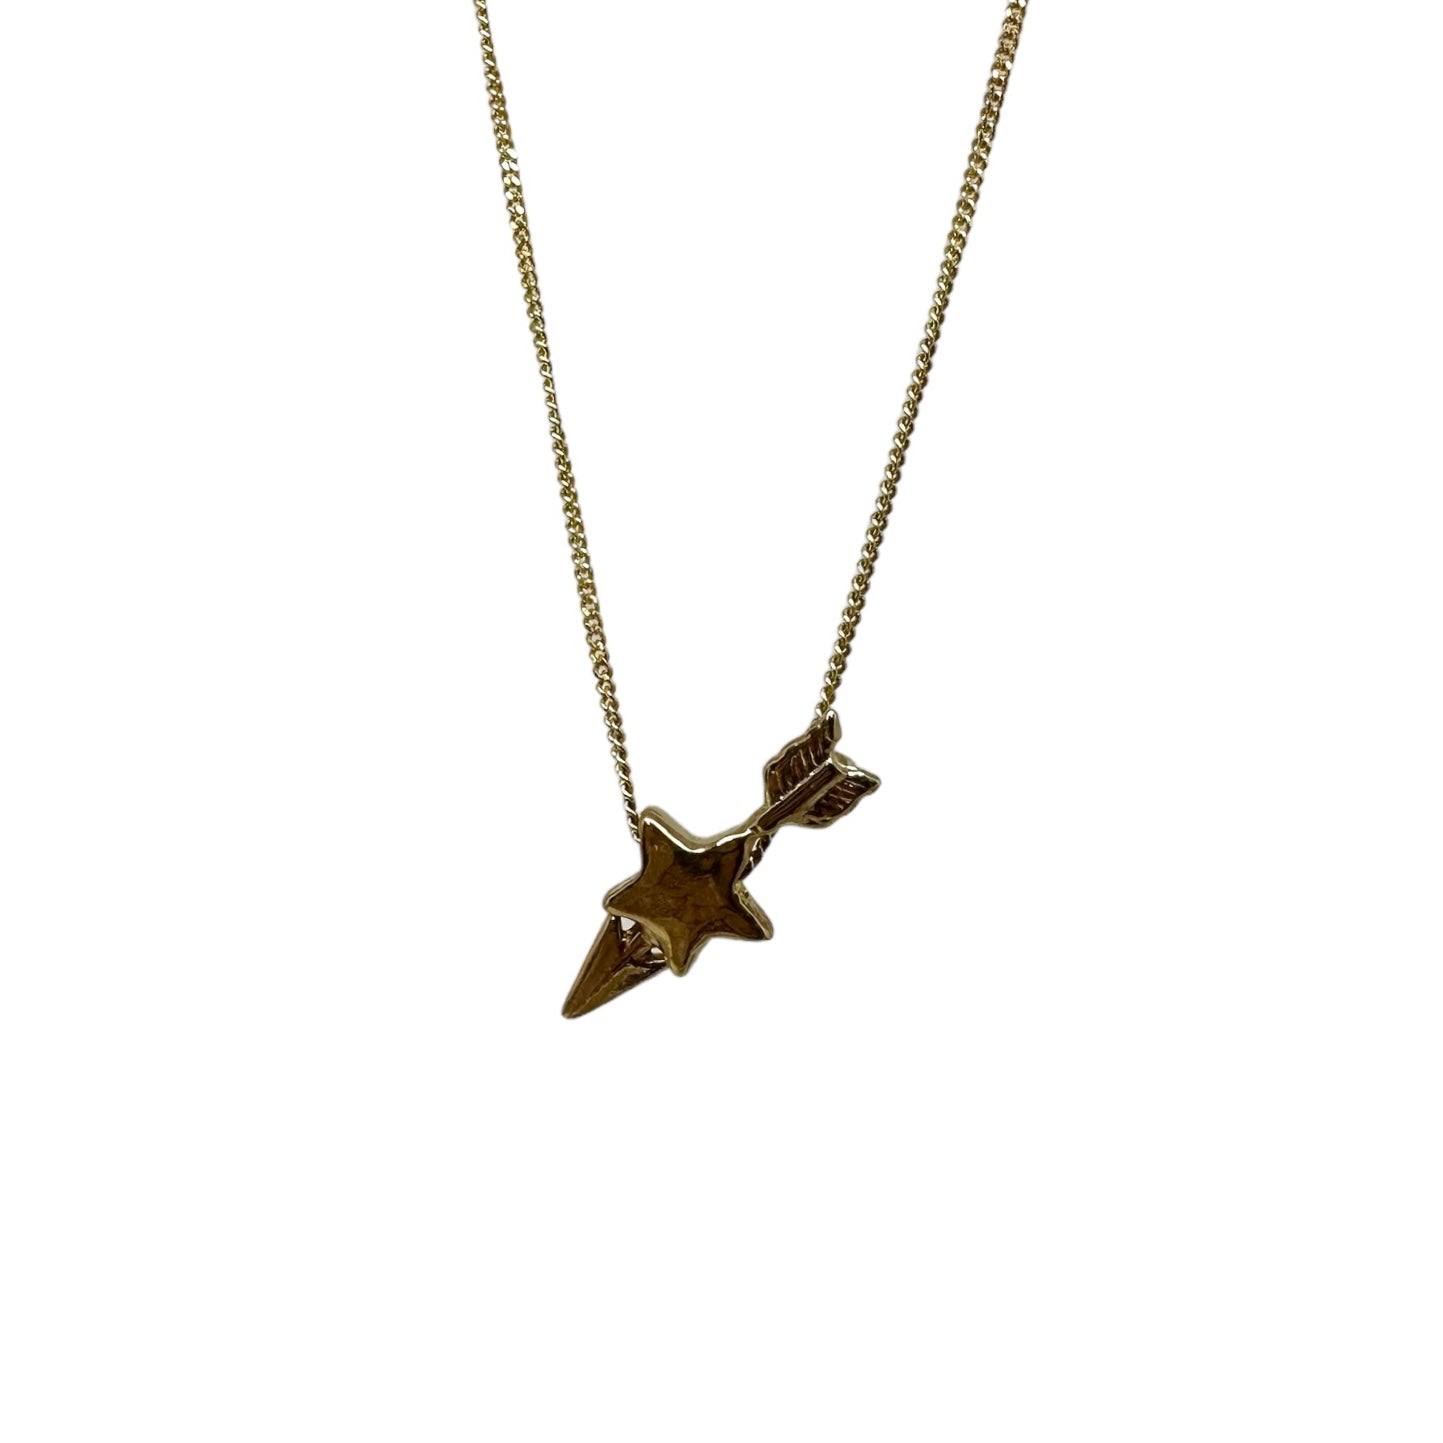 A wishing star necklace